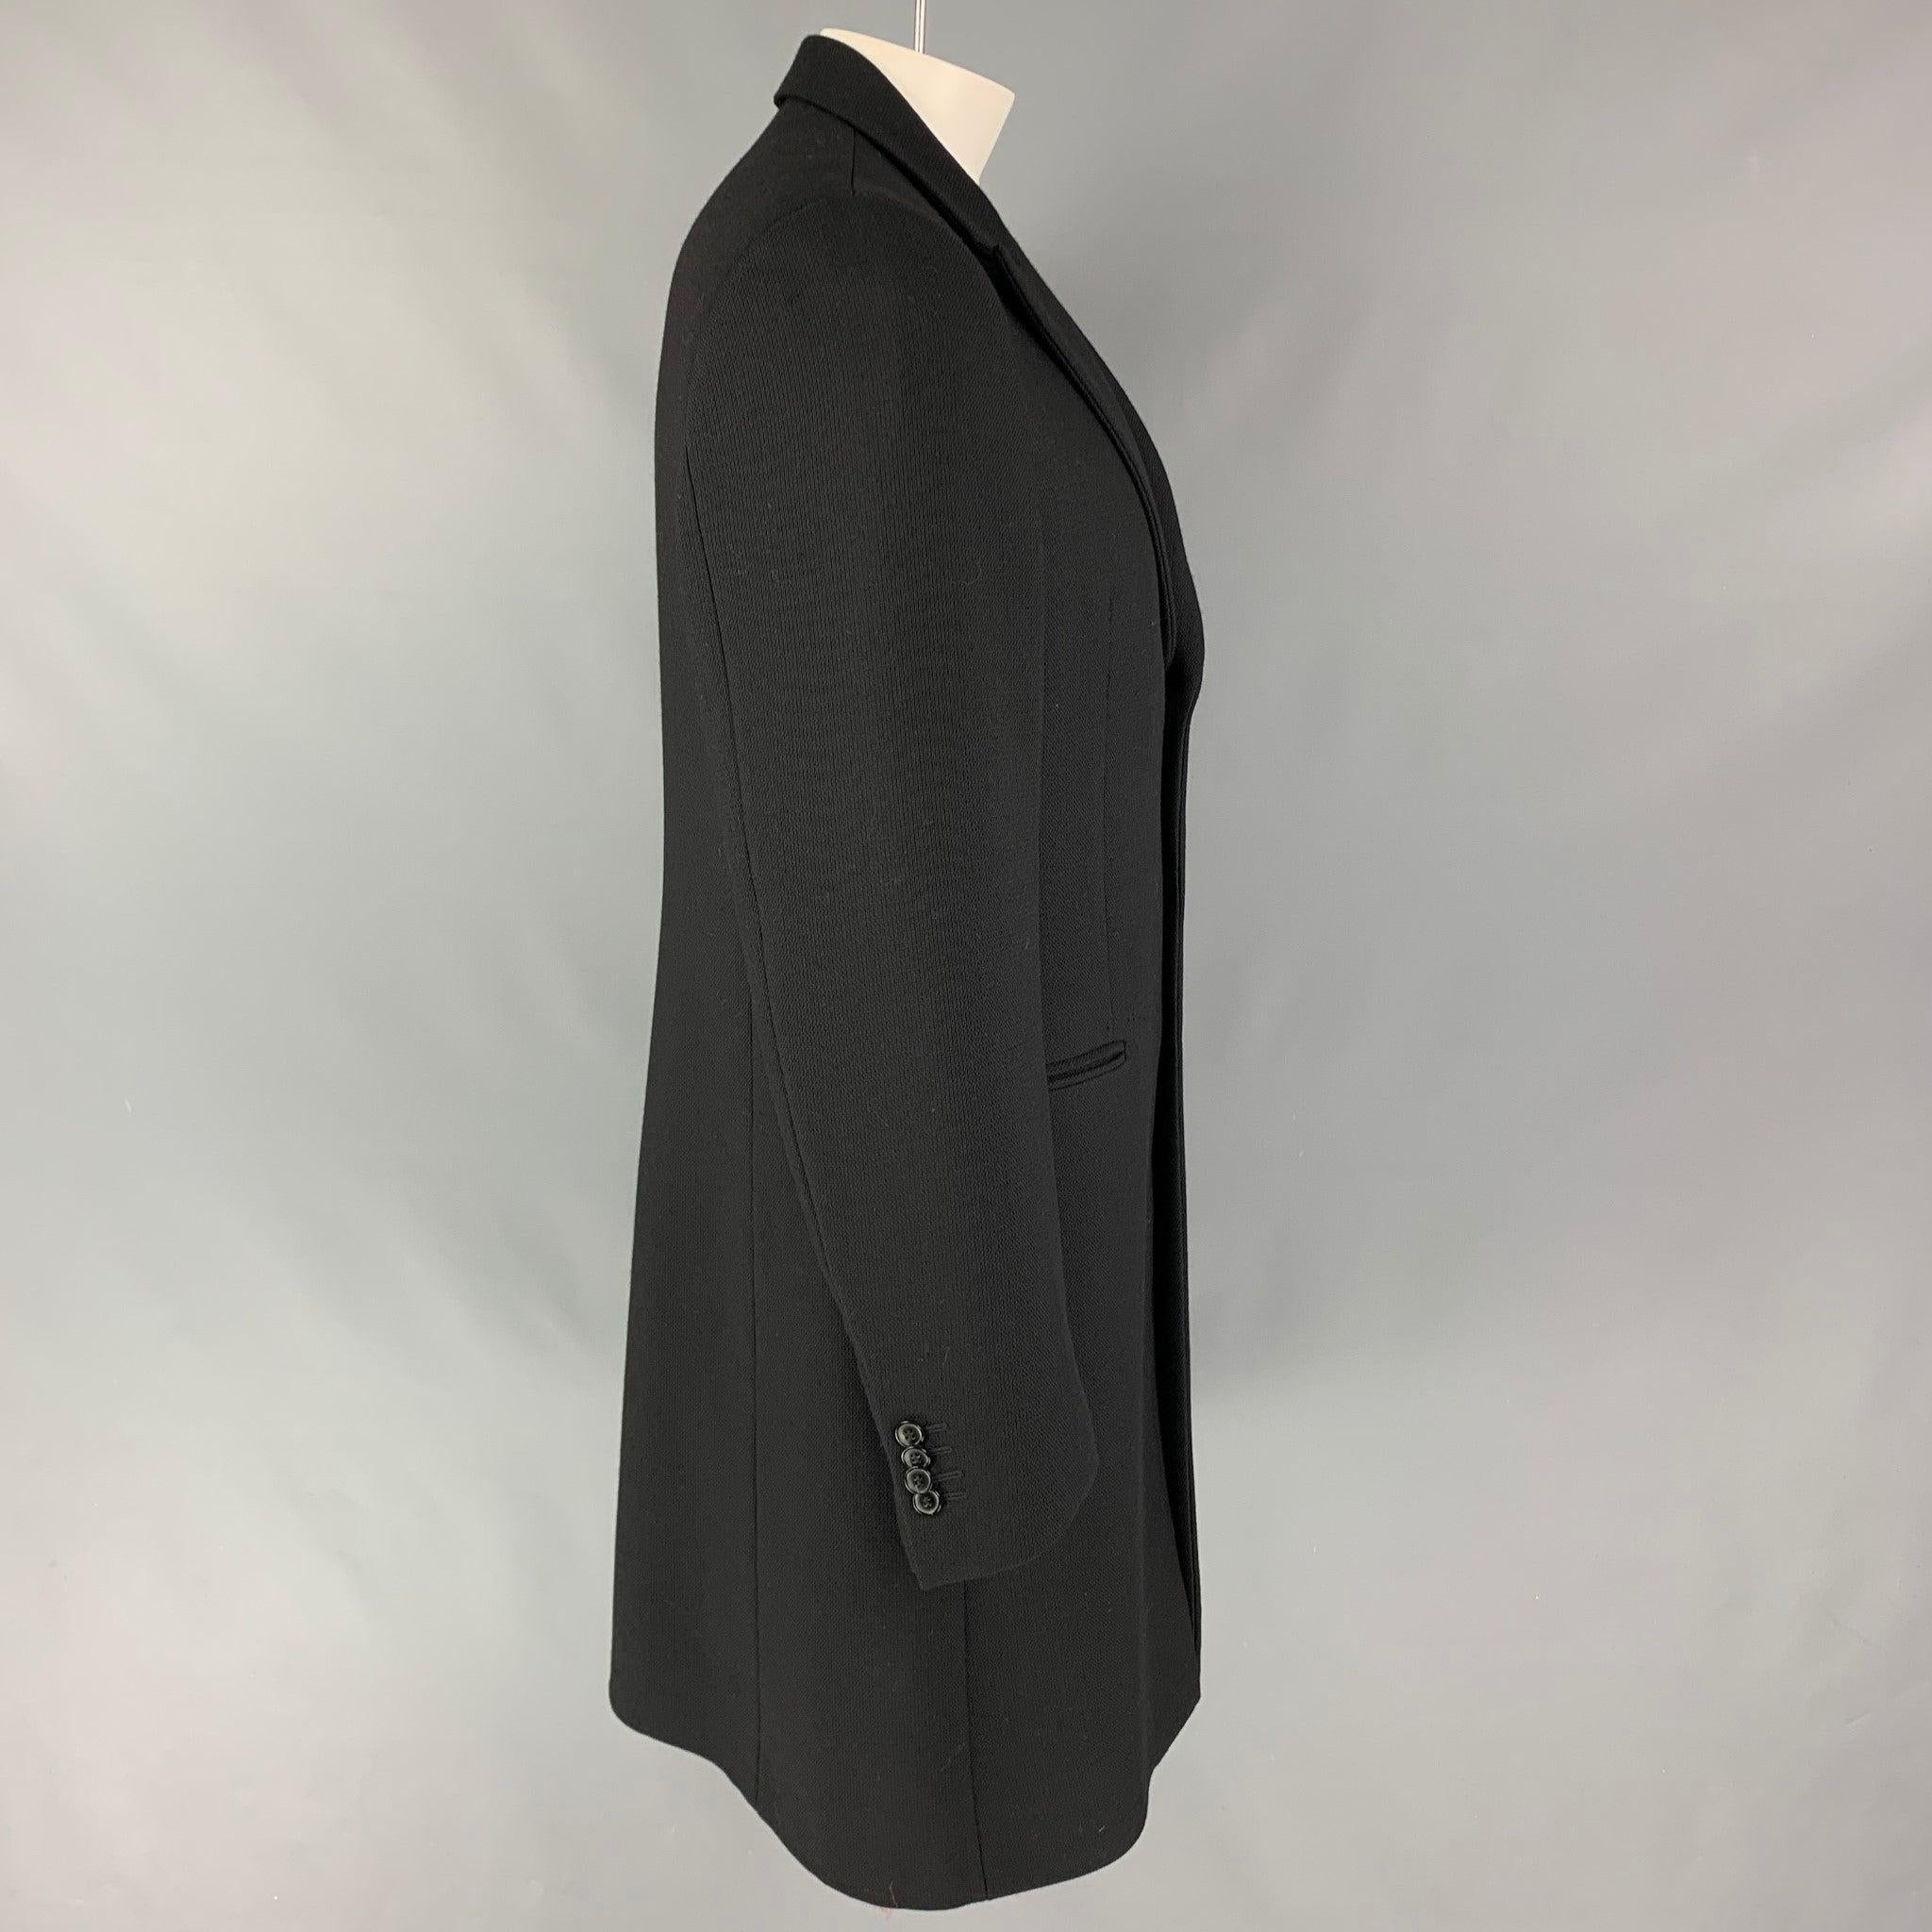 EMPORIO ARMANI coat comes in a black wool / polyamide with a full liner featuring a peak lapel, slit pockets, single back vent, and a three button closure. Made in Italy.
Very Good
Pre-Owned Condition. 

Marked:  44 

Measurements: 
 
Shoulder: 18.5